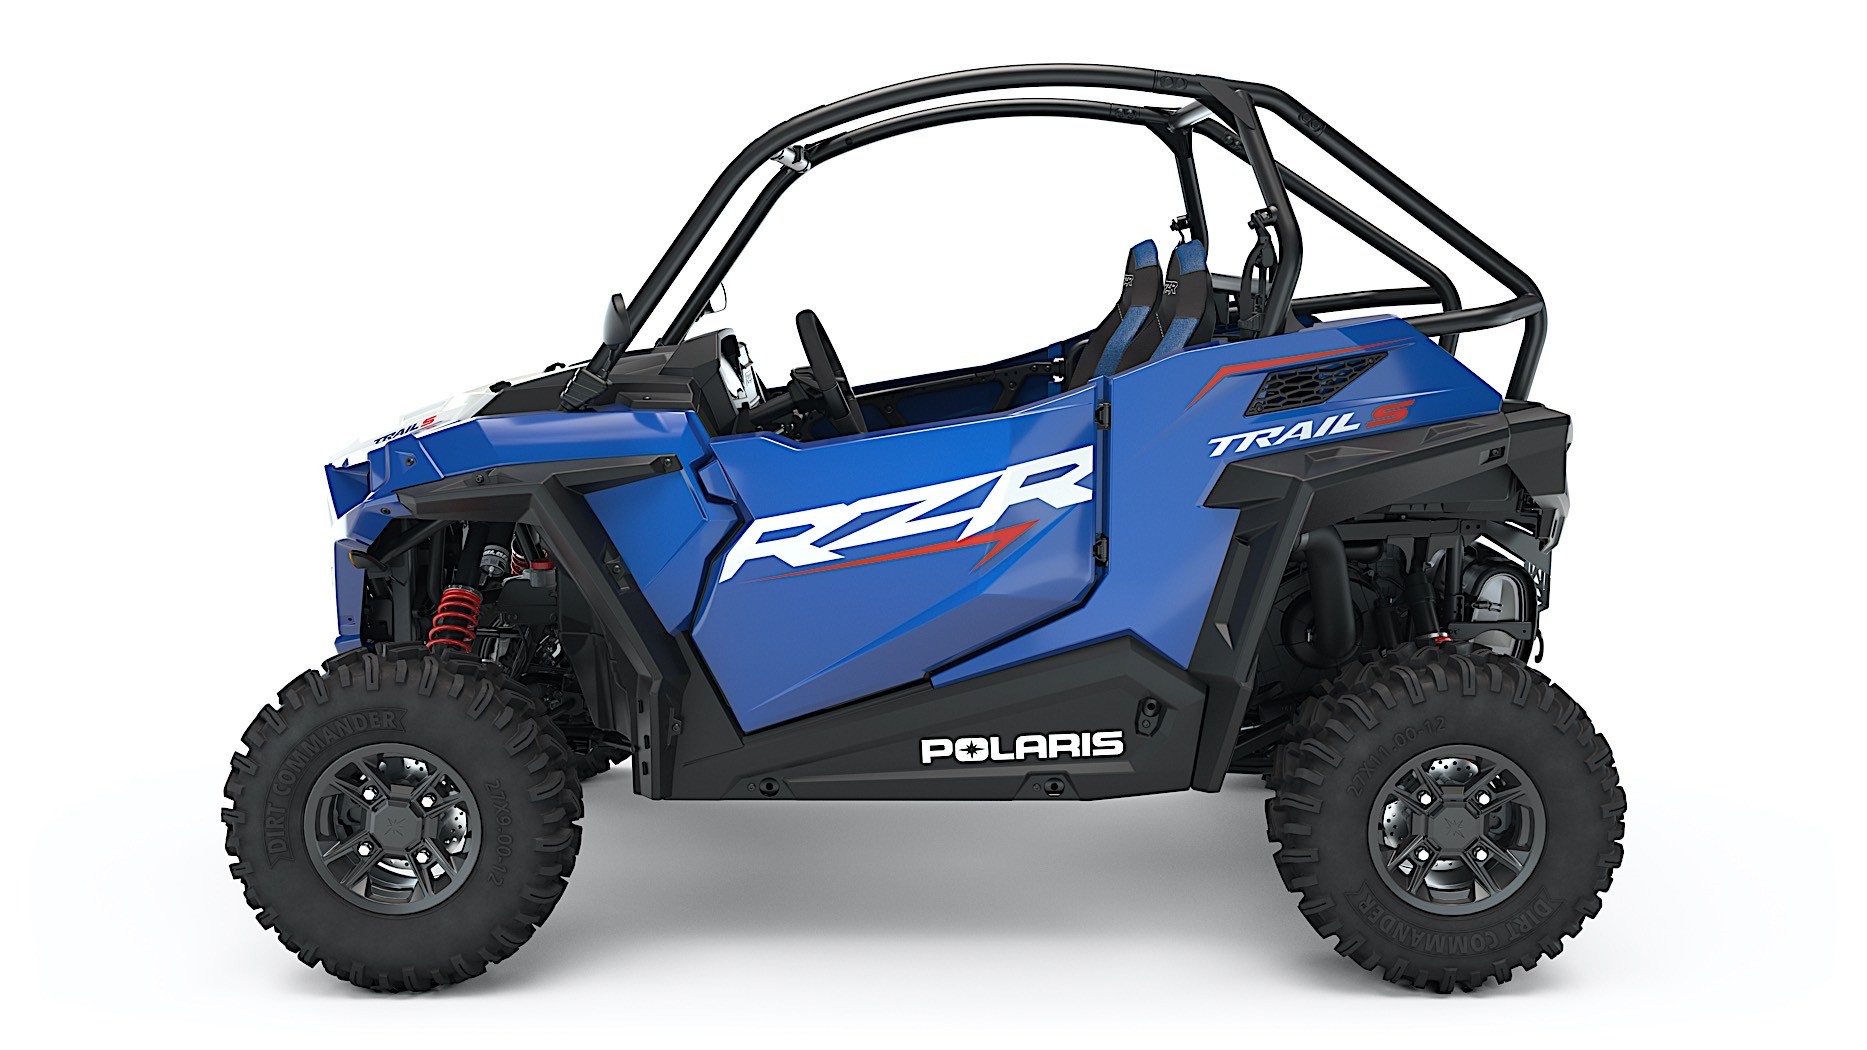 trail-s-1000-launches-as-narrowest-polaris-rzr-side-by-side-autoevolution